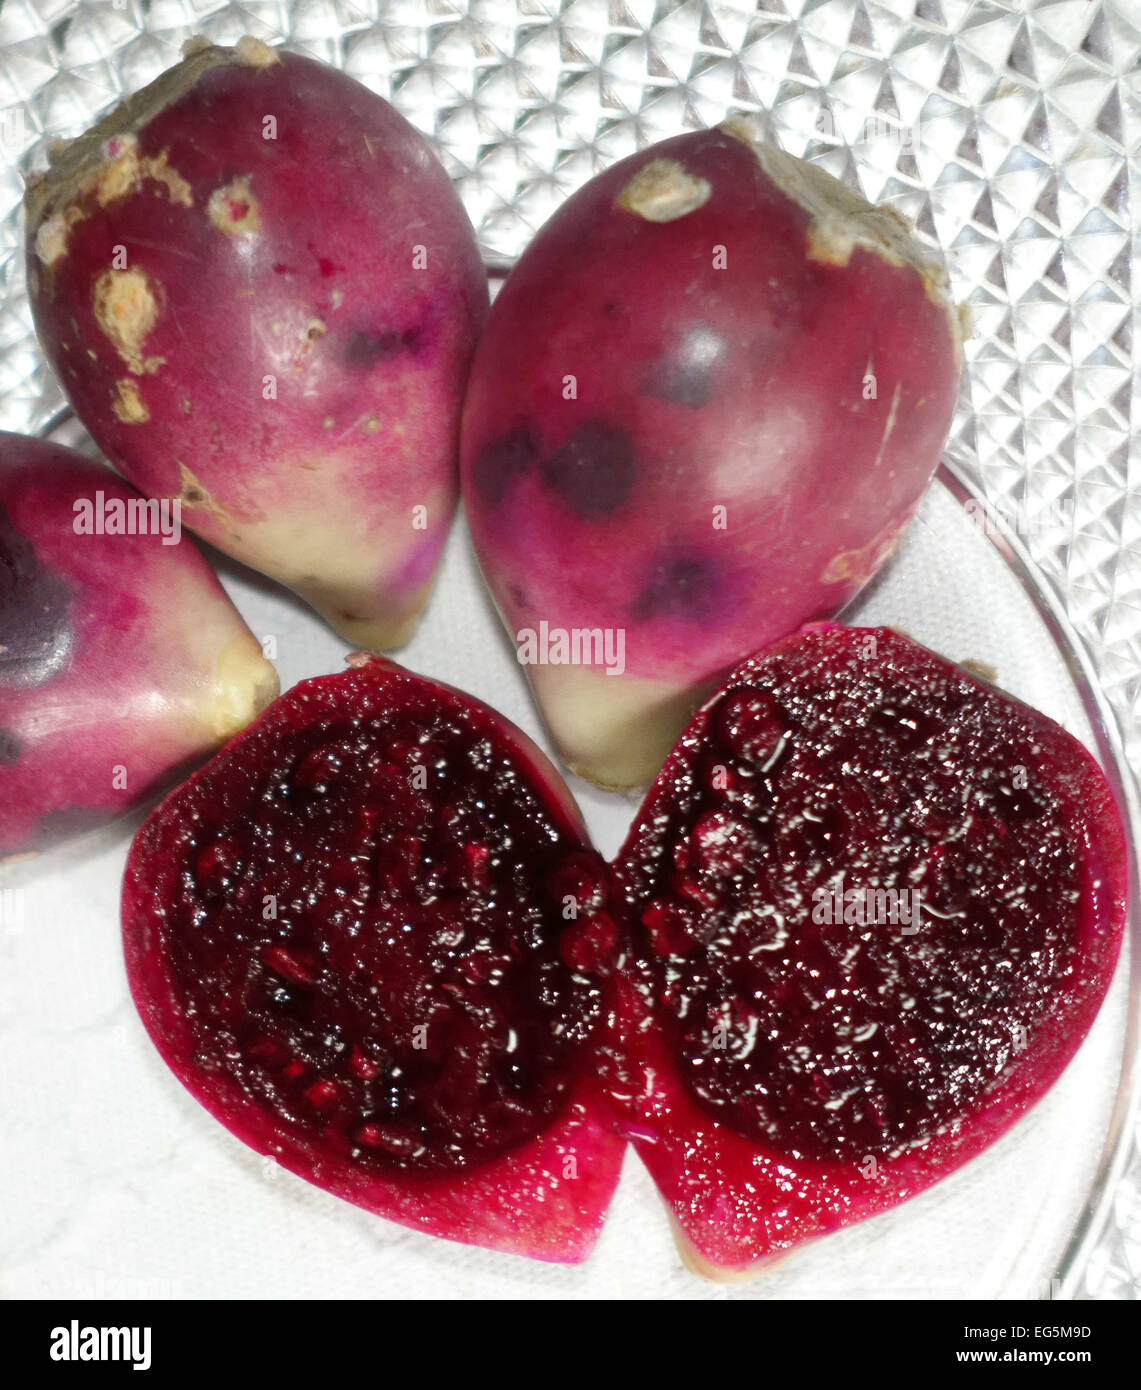 Tunos Indios or Opuntia Dillenii (local variety of prickly pear) from food market in Las Palmas de Gran Canaria, Canary Islands Stock Photo